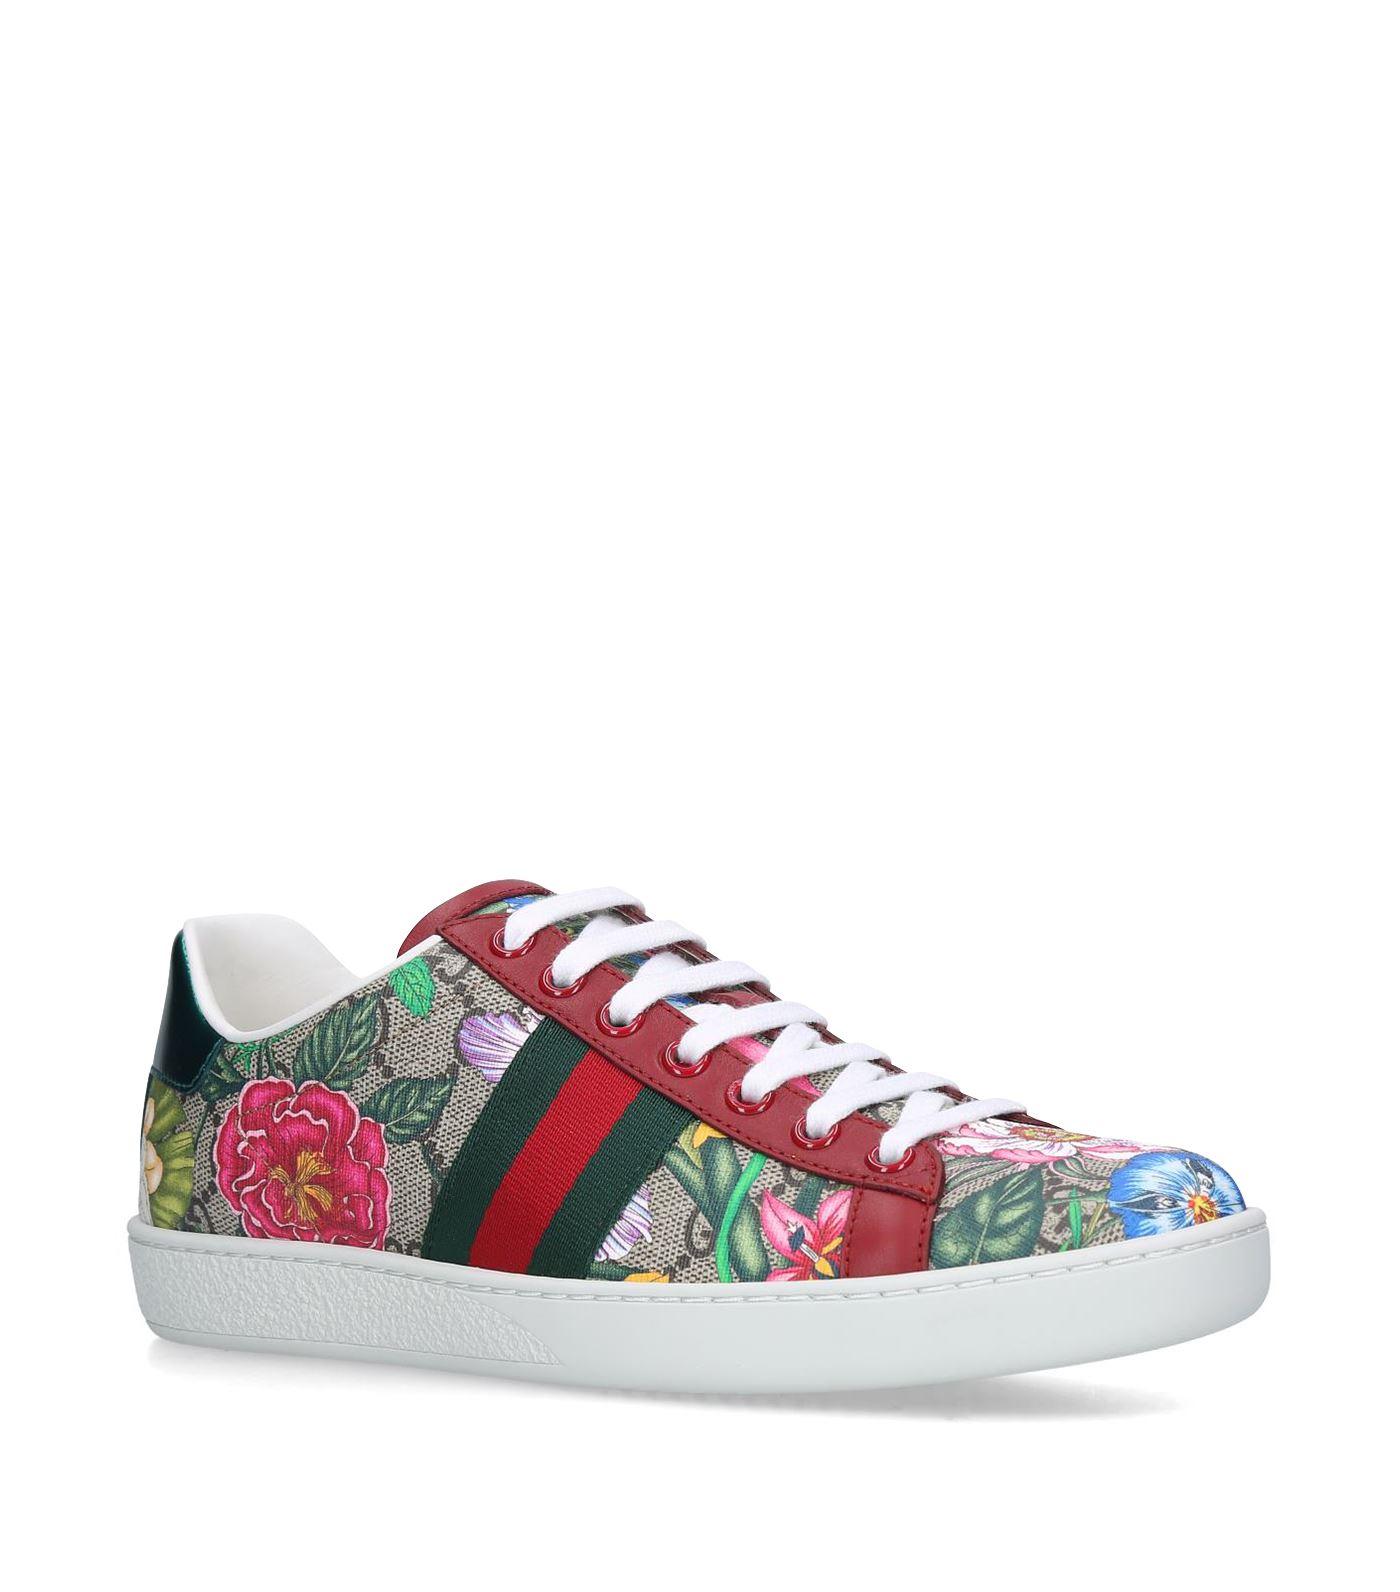 Gucci GG Supreme Flora Ace Sneakers in Beige (Natural) - Lyst